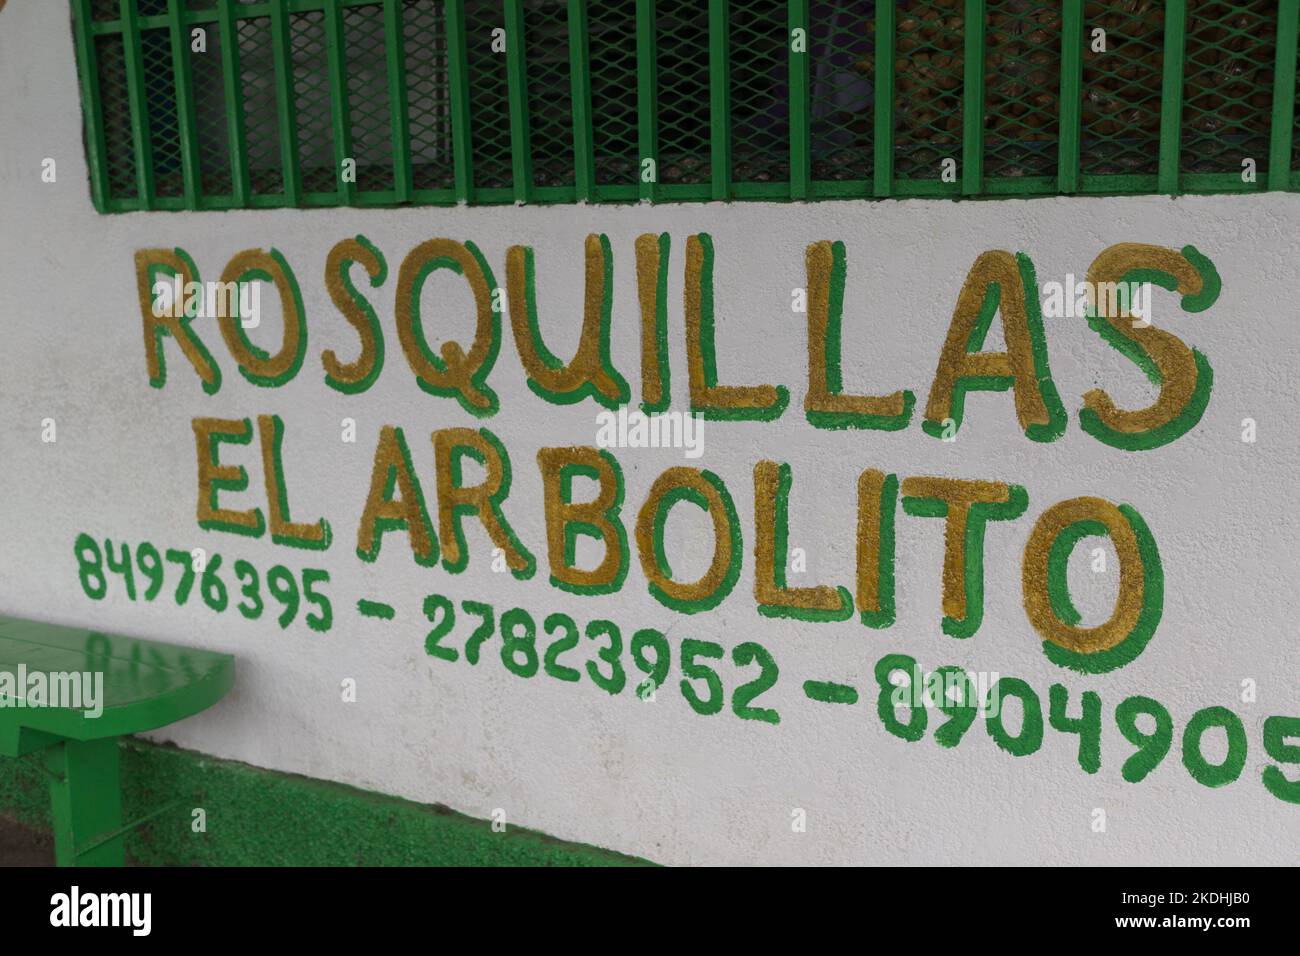 The wall sign for a rosquilla bakery.  Rosquillas are corn masa and lard cookies, very popular in Nicaragua.  The original Spanish meant donut. Stock Photo